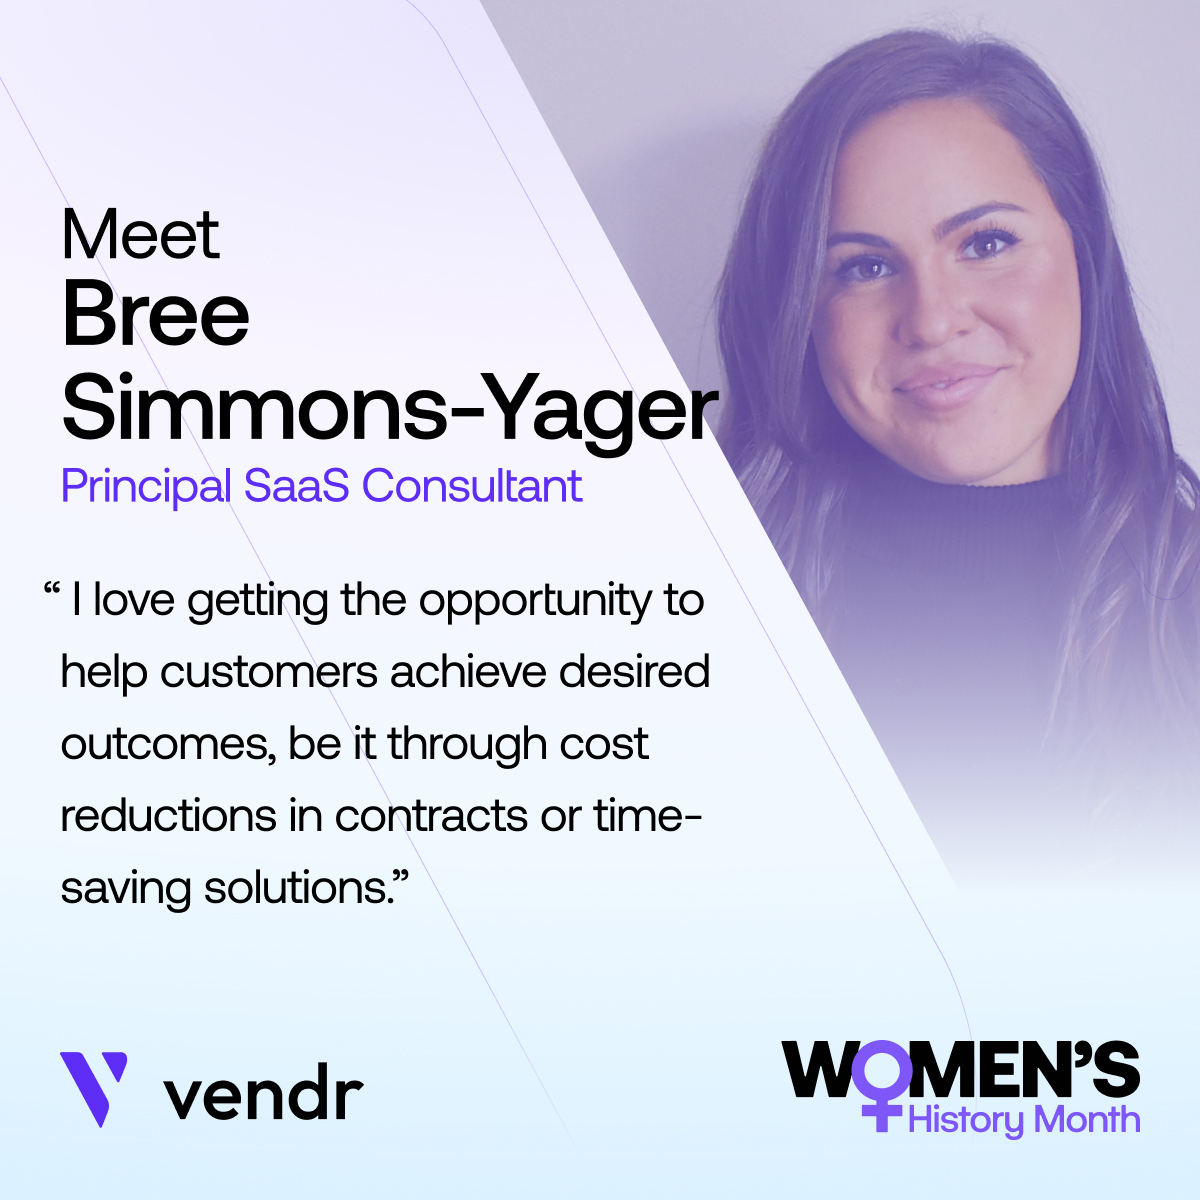 Wondering what it’s like to take advantage of free net new negotiations with Vendr? Meet Bree: one of our experts who will help ensure you get a fair deal. With avg savings of $14,452 per transaction, free negotiation support is our ultimate no-brainer visit.vendr.com/3VkPSFz